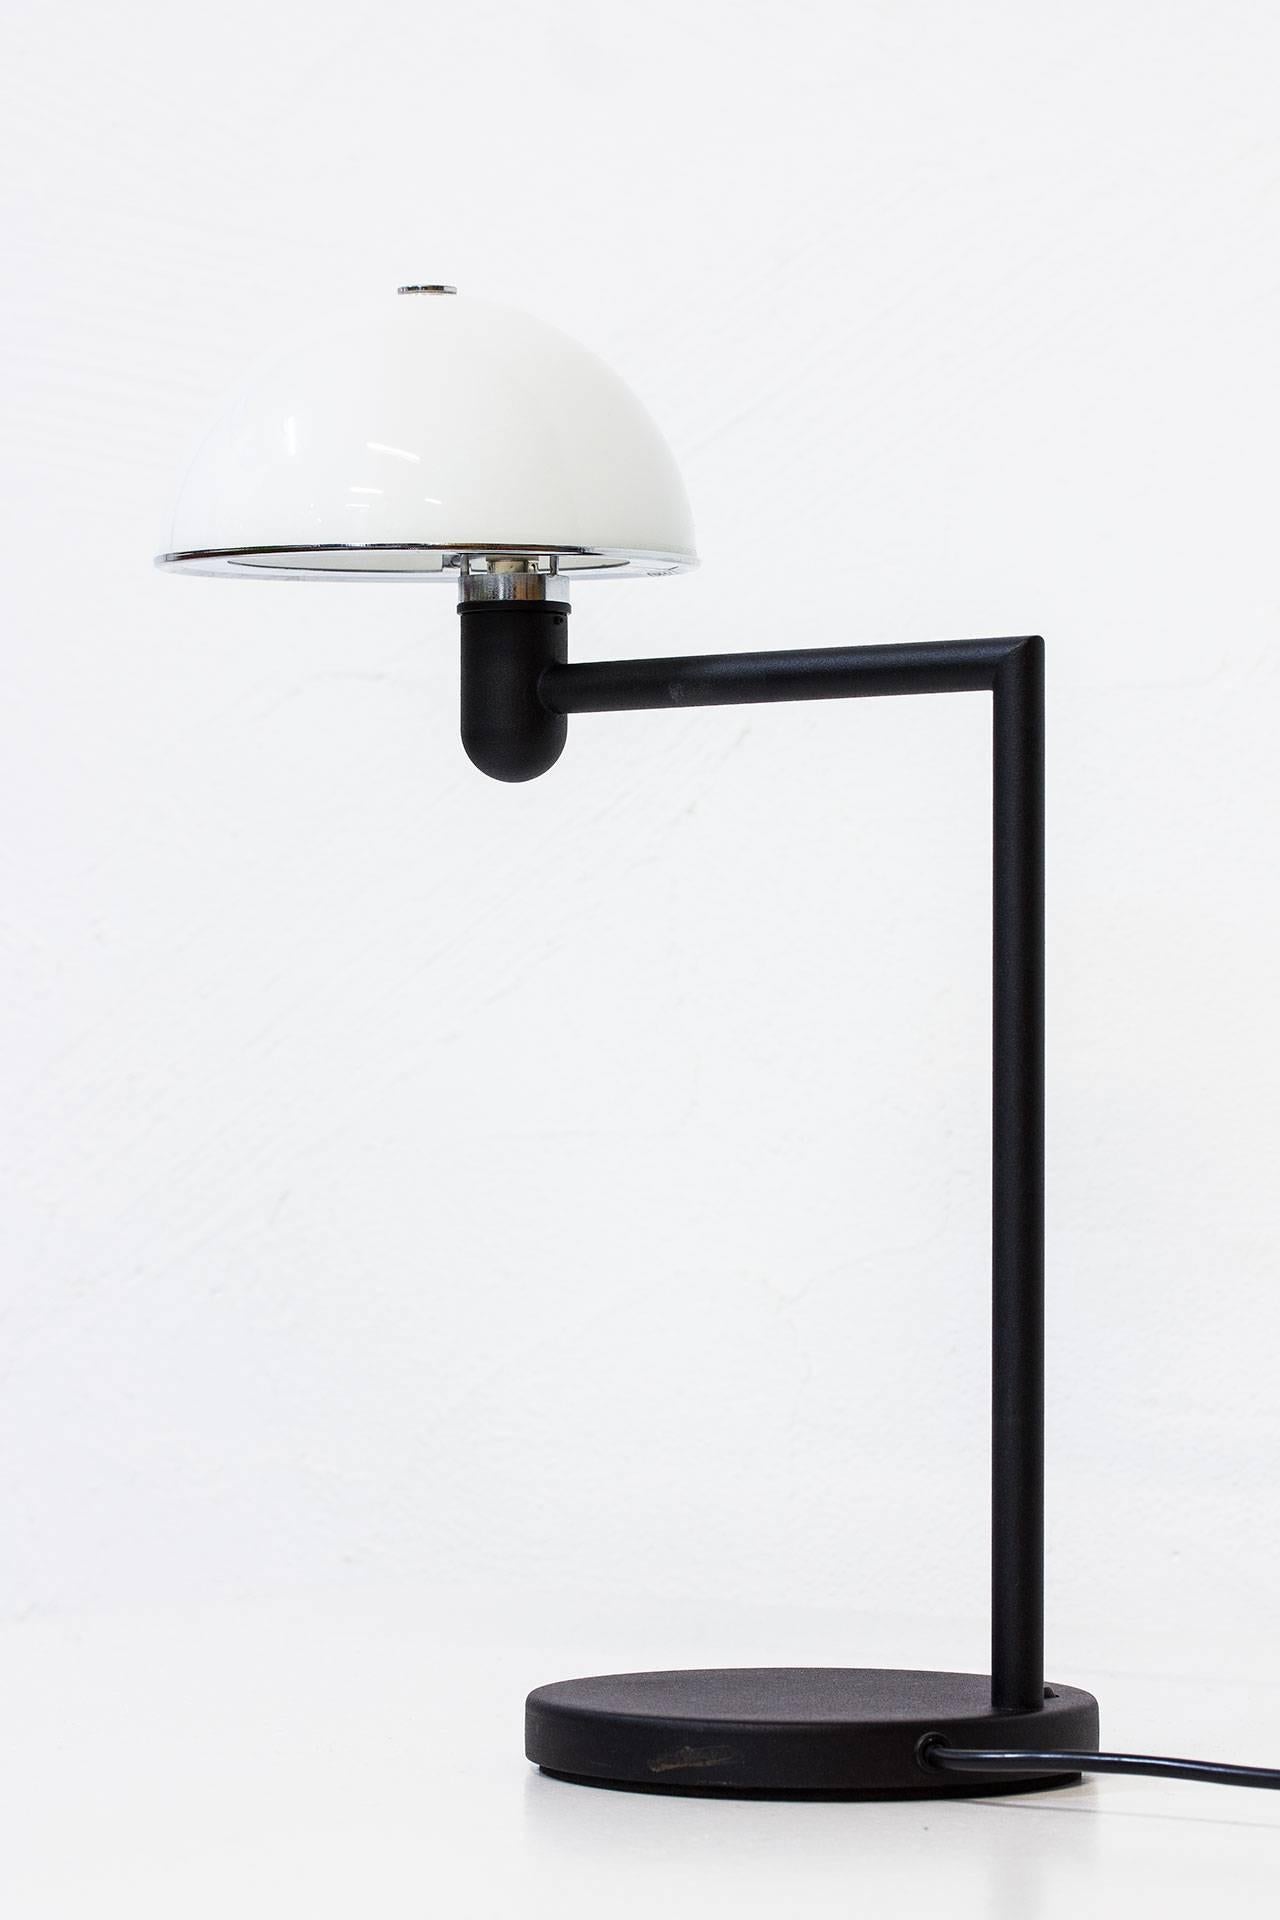 Table lamp designed by Per Sundstedt for Zero Interior in Sweden during the 1980s. Matte black
powder-coated steel stem with opaline glass diffuser.